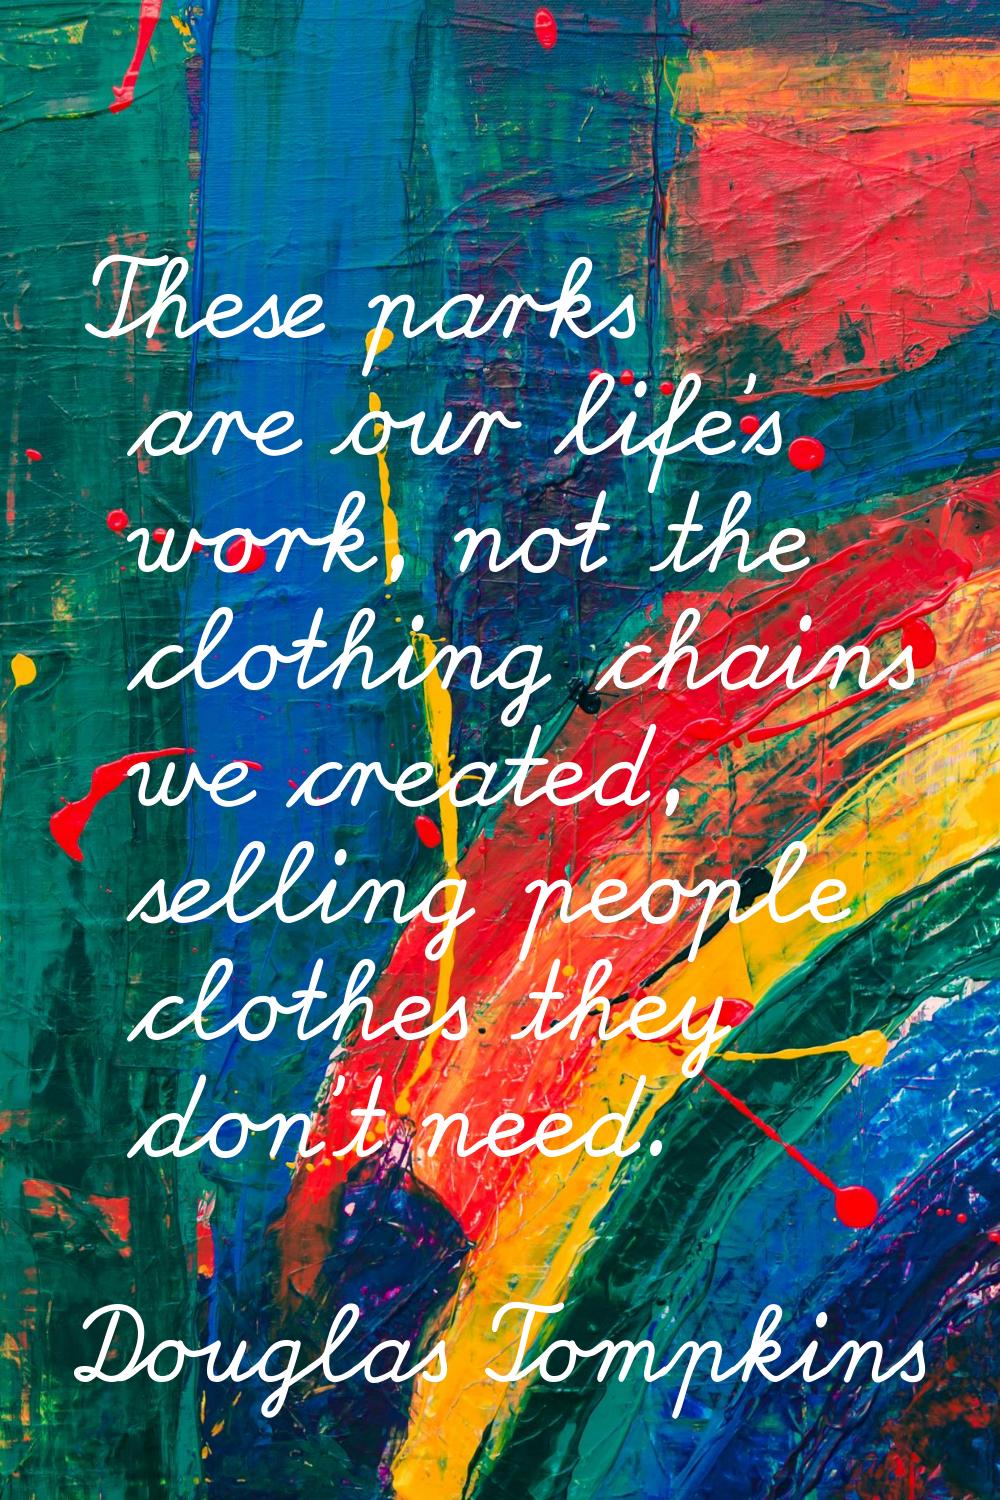 These parks are our life's work, not the clothing chains we created, selling people clothes they do